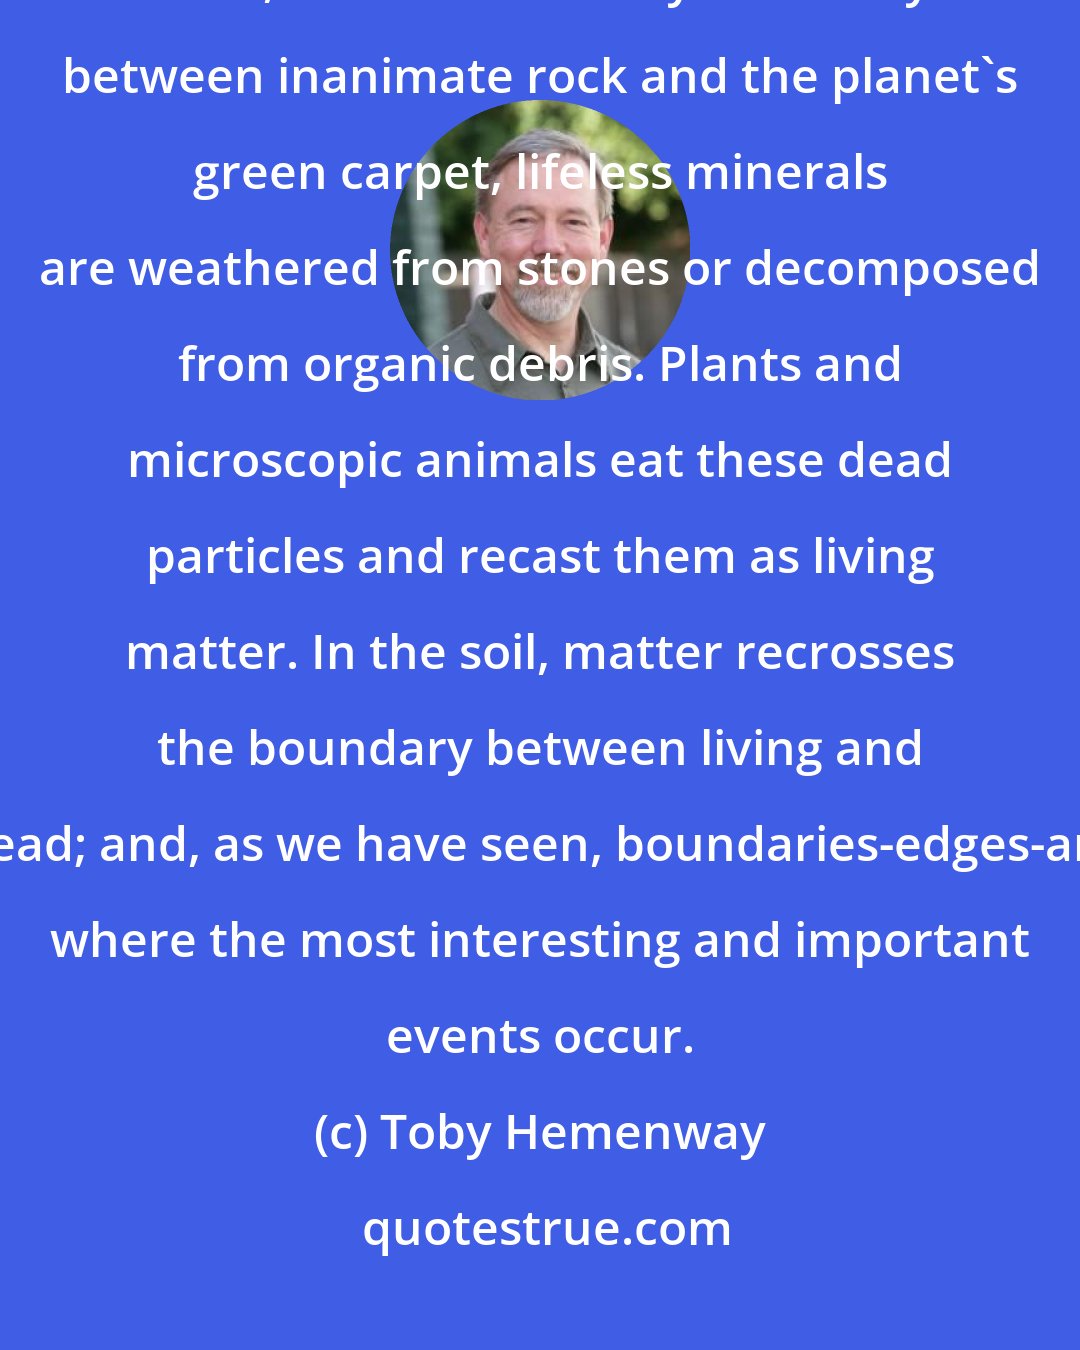 Toby Hemenway: Yet soil is miraculous. It is where the dead are brought back to life. Here, in the thin earthy boundary between inanimate rock and the planet's green carpet, lifeless minerals are weathered from stones or decomposed from organic debris. Plants and microscopic animals eat these dead particles and recast them as living matter. In the soil, matter recrosses the boundary between living and dead; and, as we have seen, boundaries-edges-are where the most interesting and important events occur.